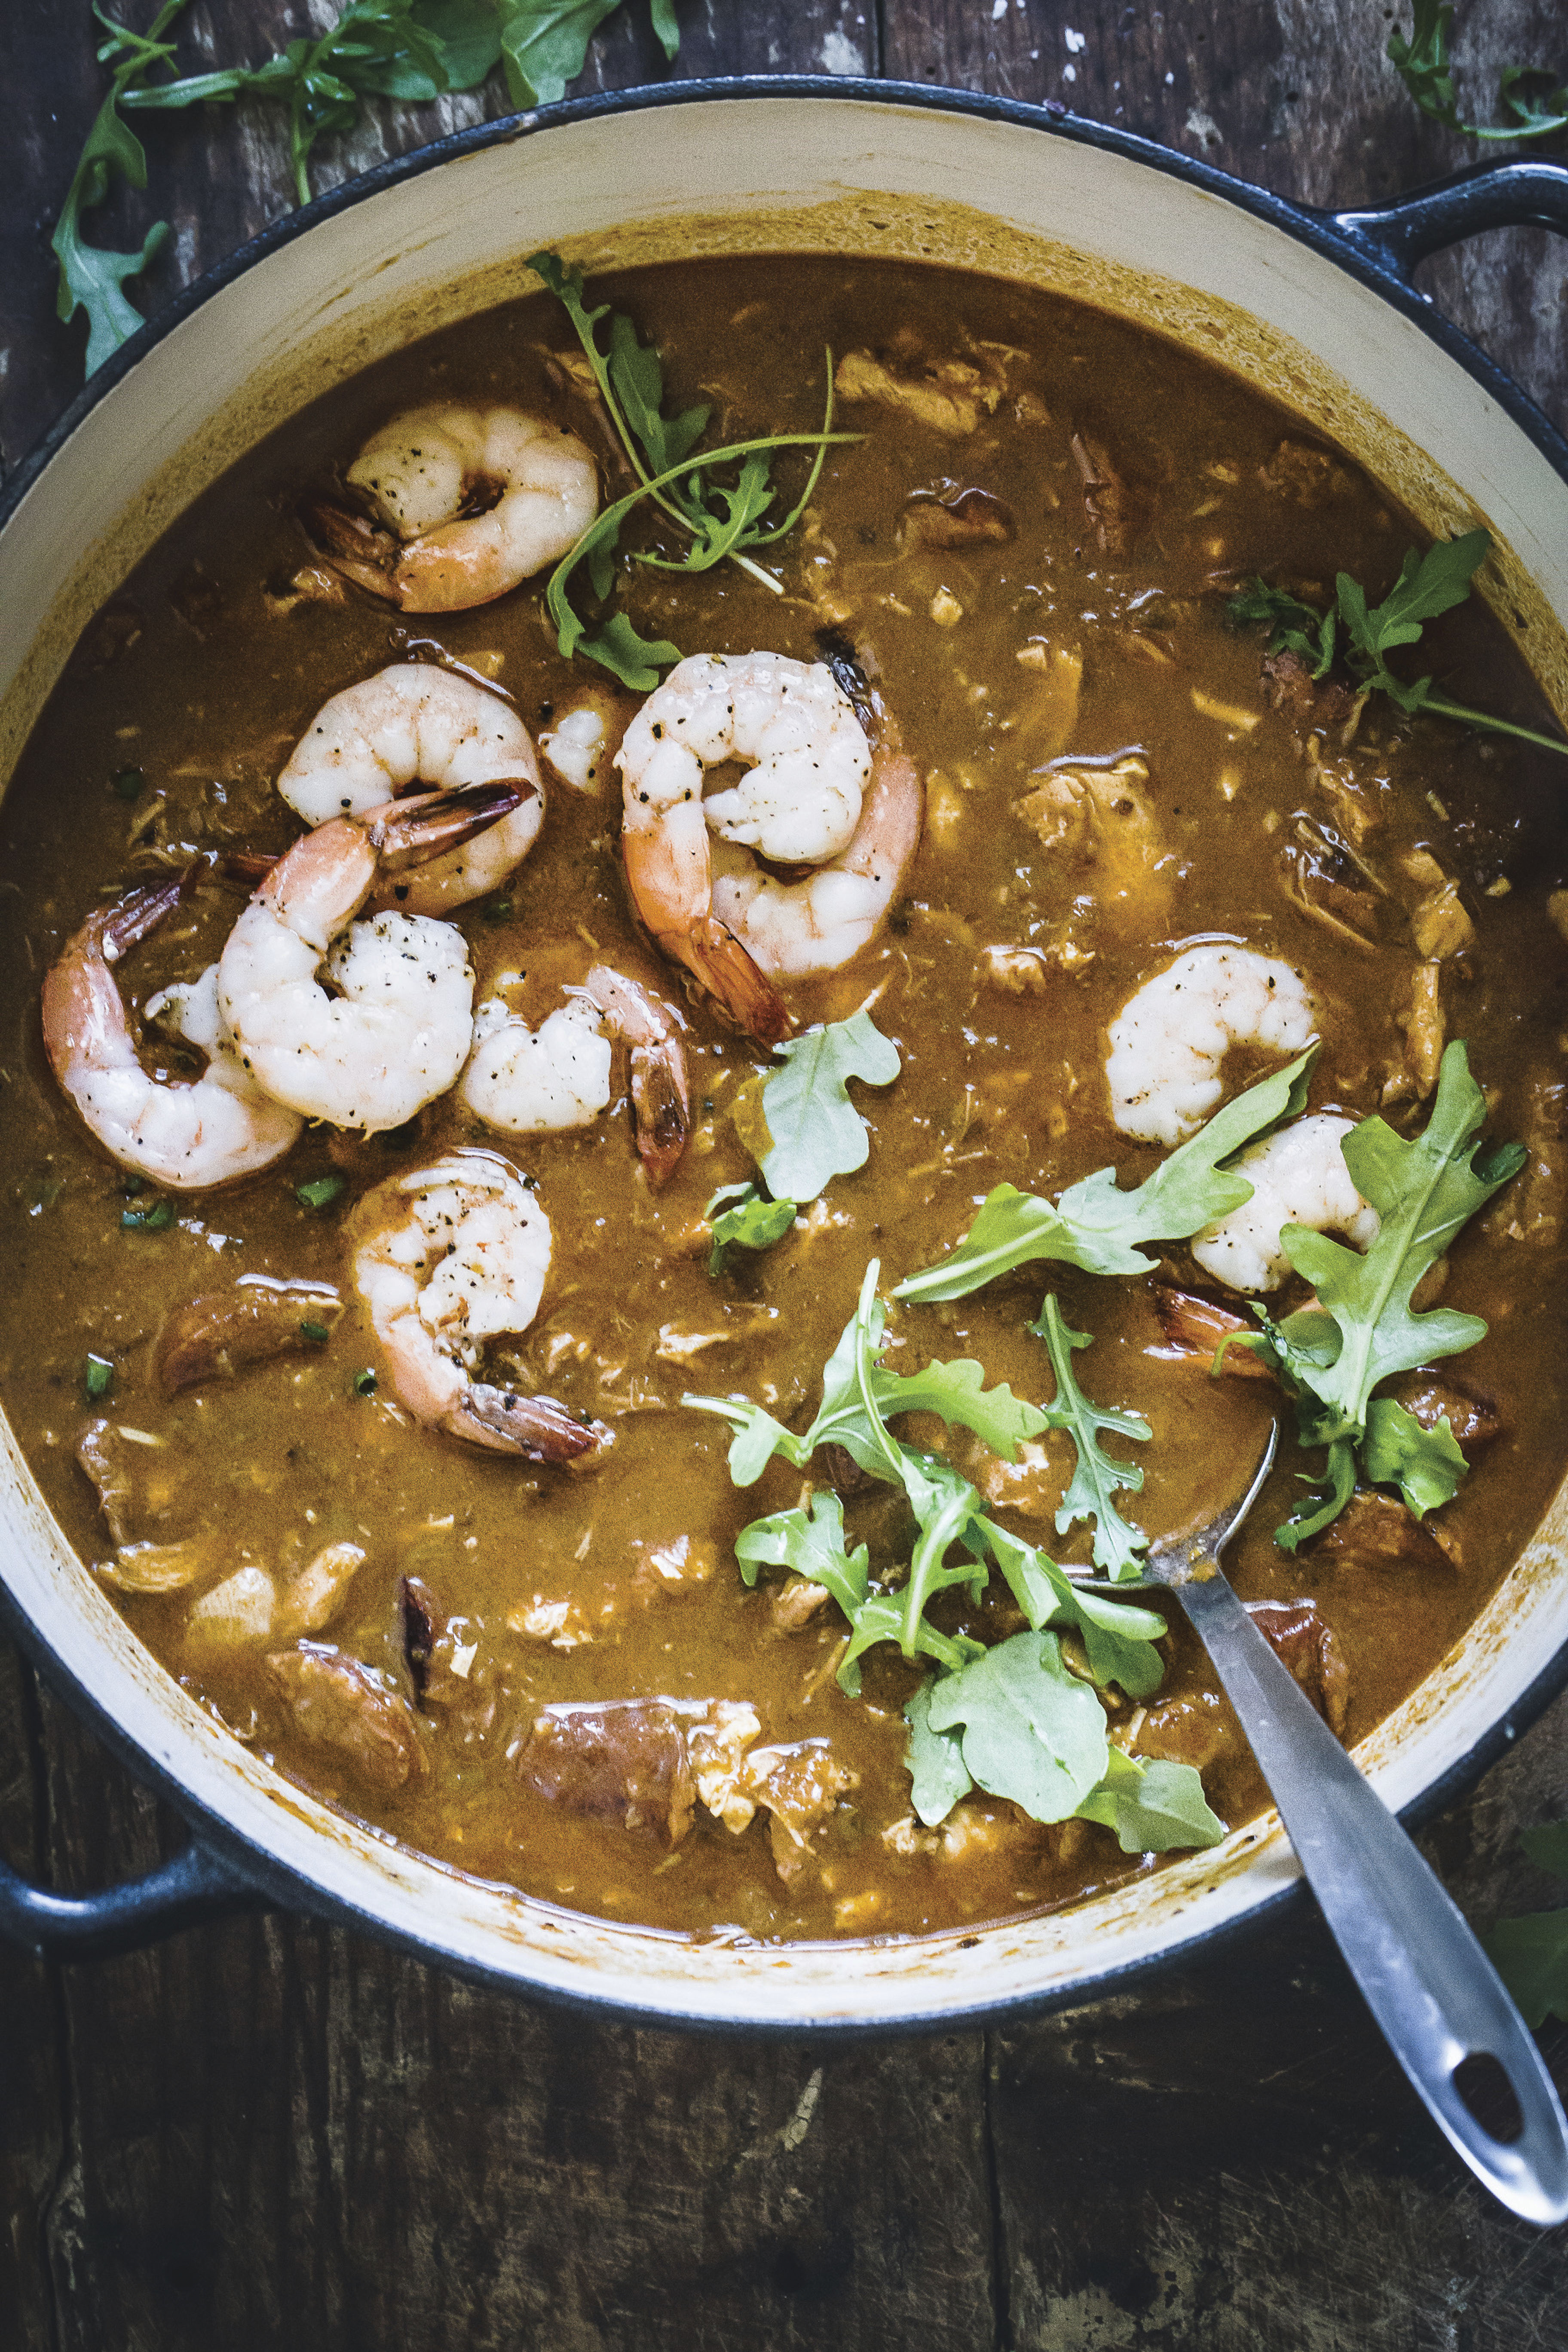 Dish to Indulge: “Cajun and Creole cuisine: I make an andouille and chicken étouffée I just love. There’s nothing light about it, but it’s so good.